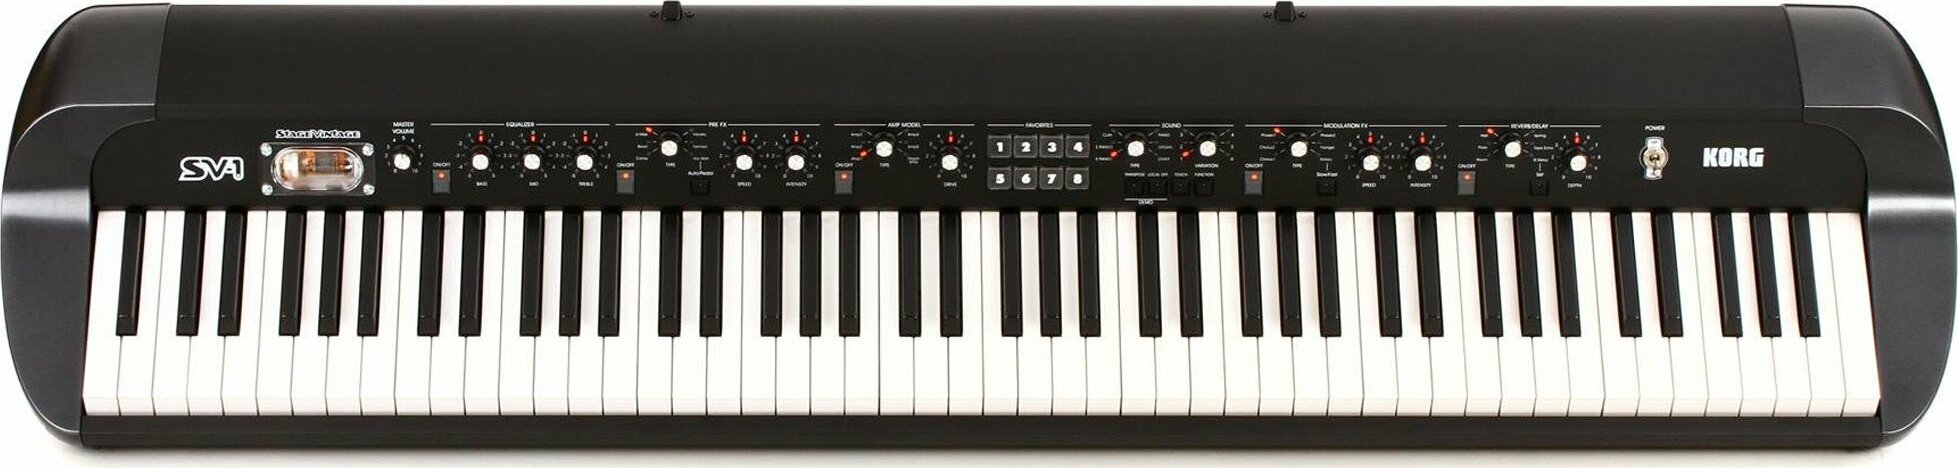 Korg Sv1 88 Bk Expo - Black - Stage keyboard - Main picture